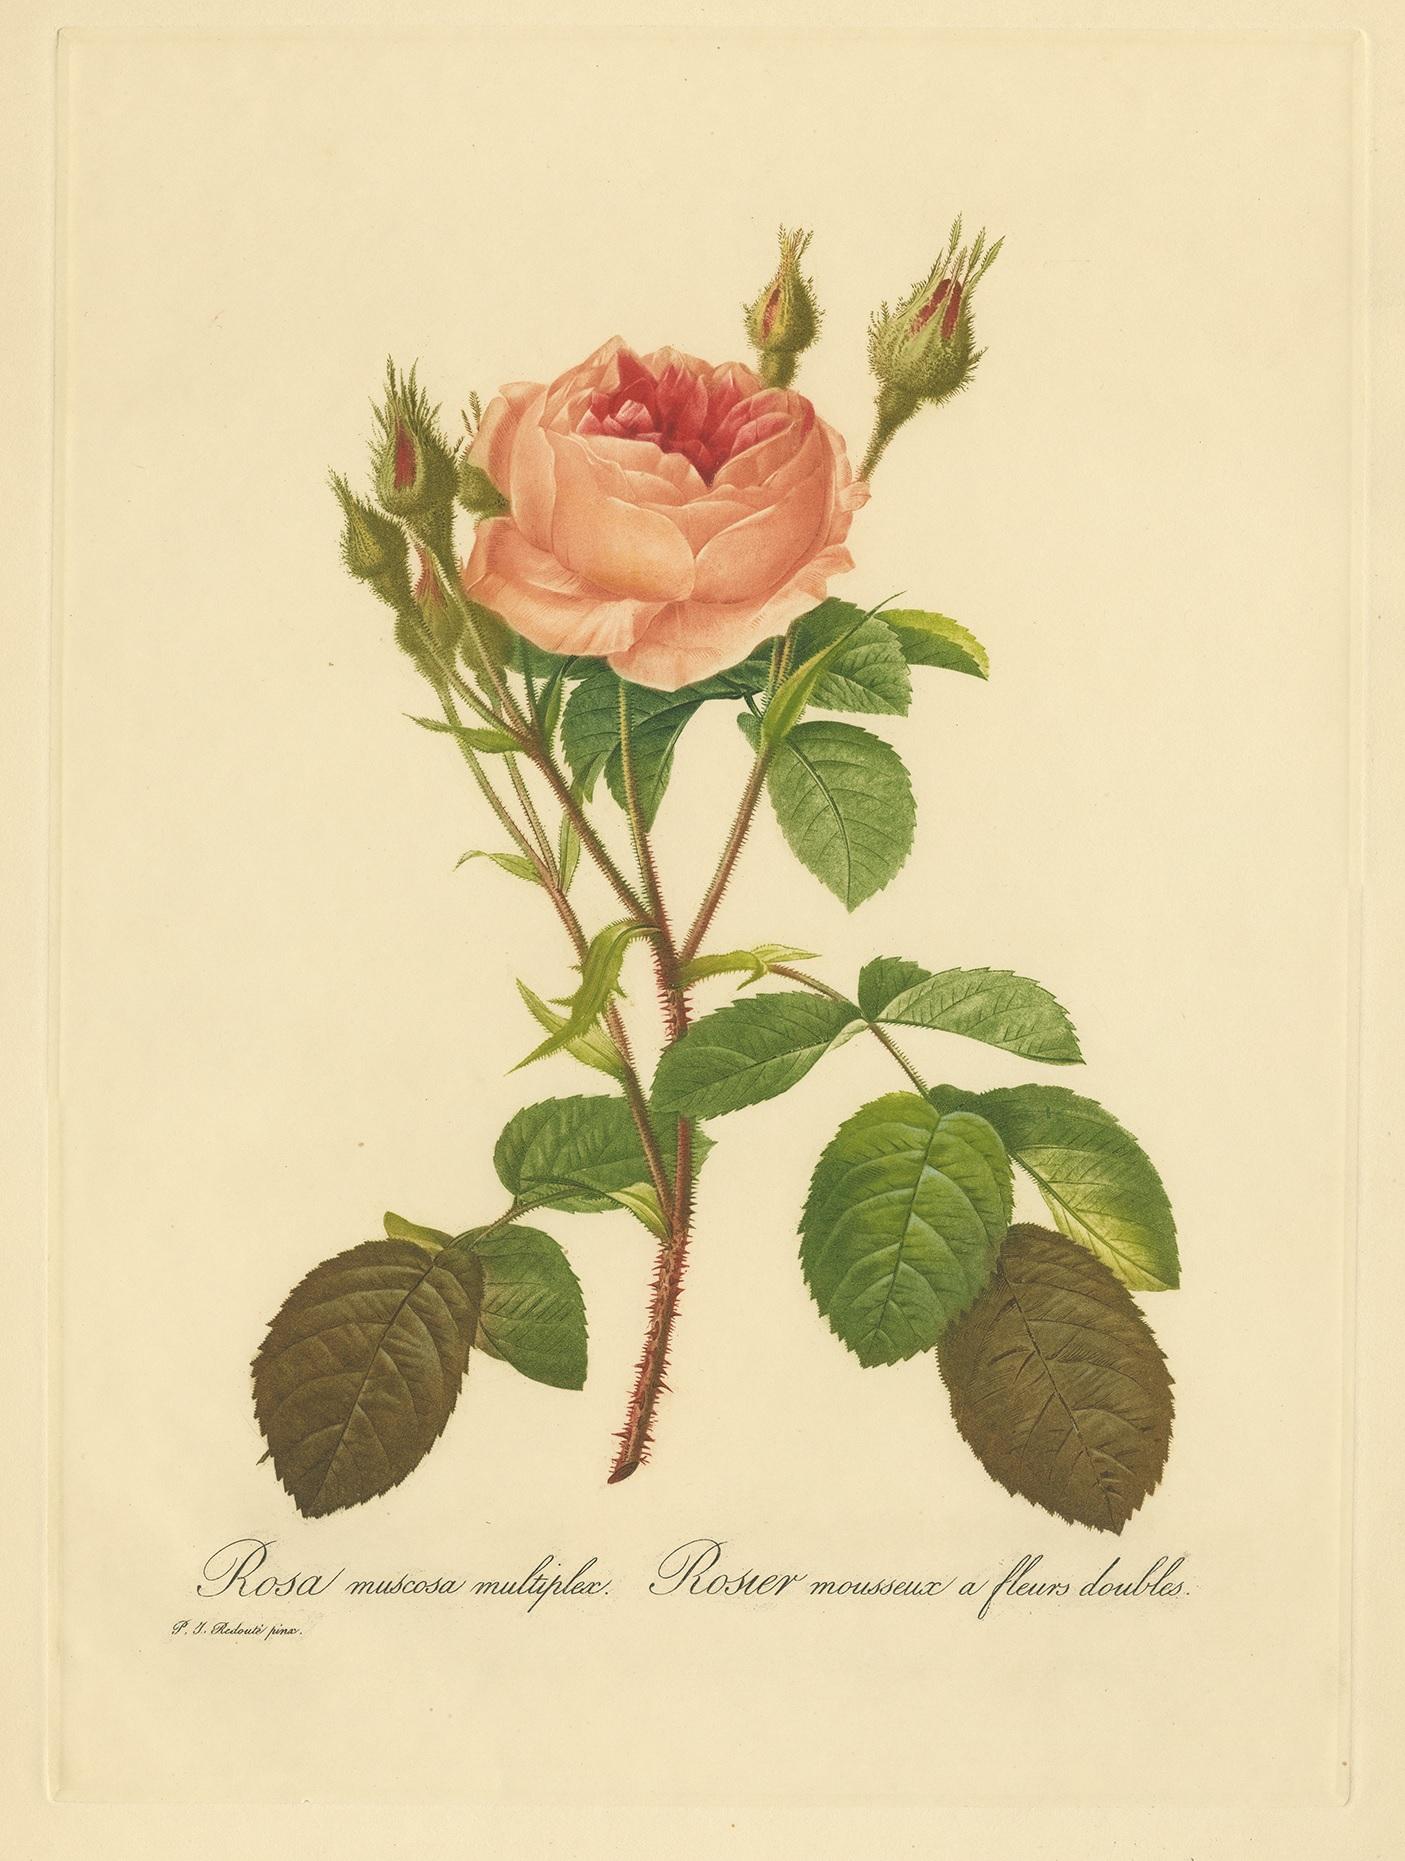 Beautiful botanical print made after P.J. Redouté, published by the Paris Etching Society. Pierre-Joseph Redoute is regarded as the greatest botanical artist. His portrayals of roses, flowers and fruit are rightly regarded as classics to this day